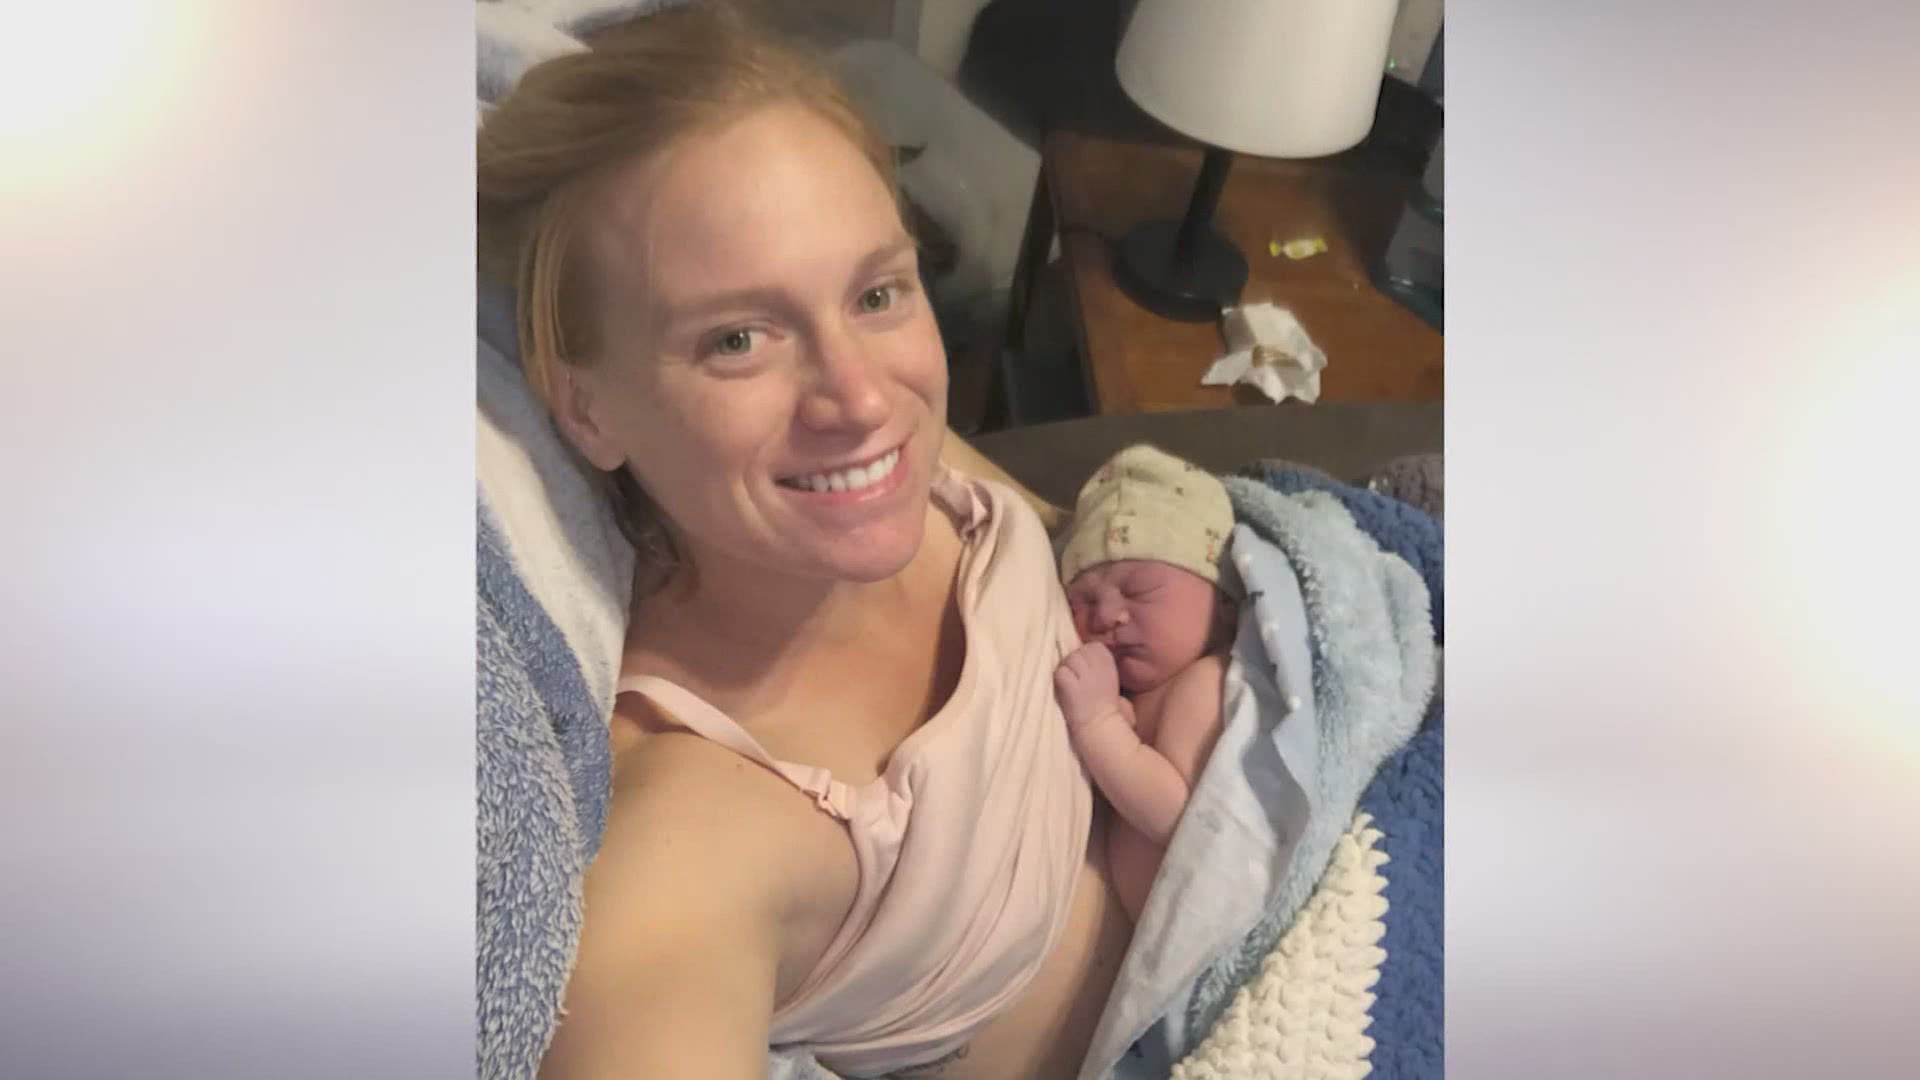 A couple in Magnolia is sharing the incredible story of their fight to safely deliver their son into the world, all during an ice storm without power and water.